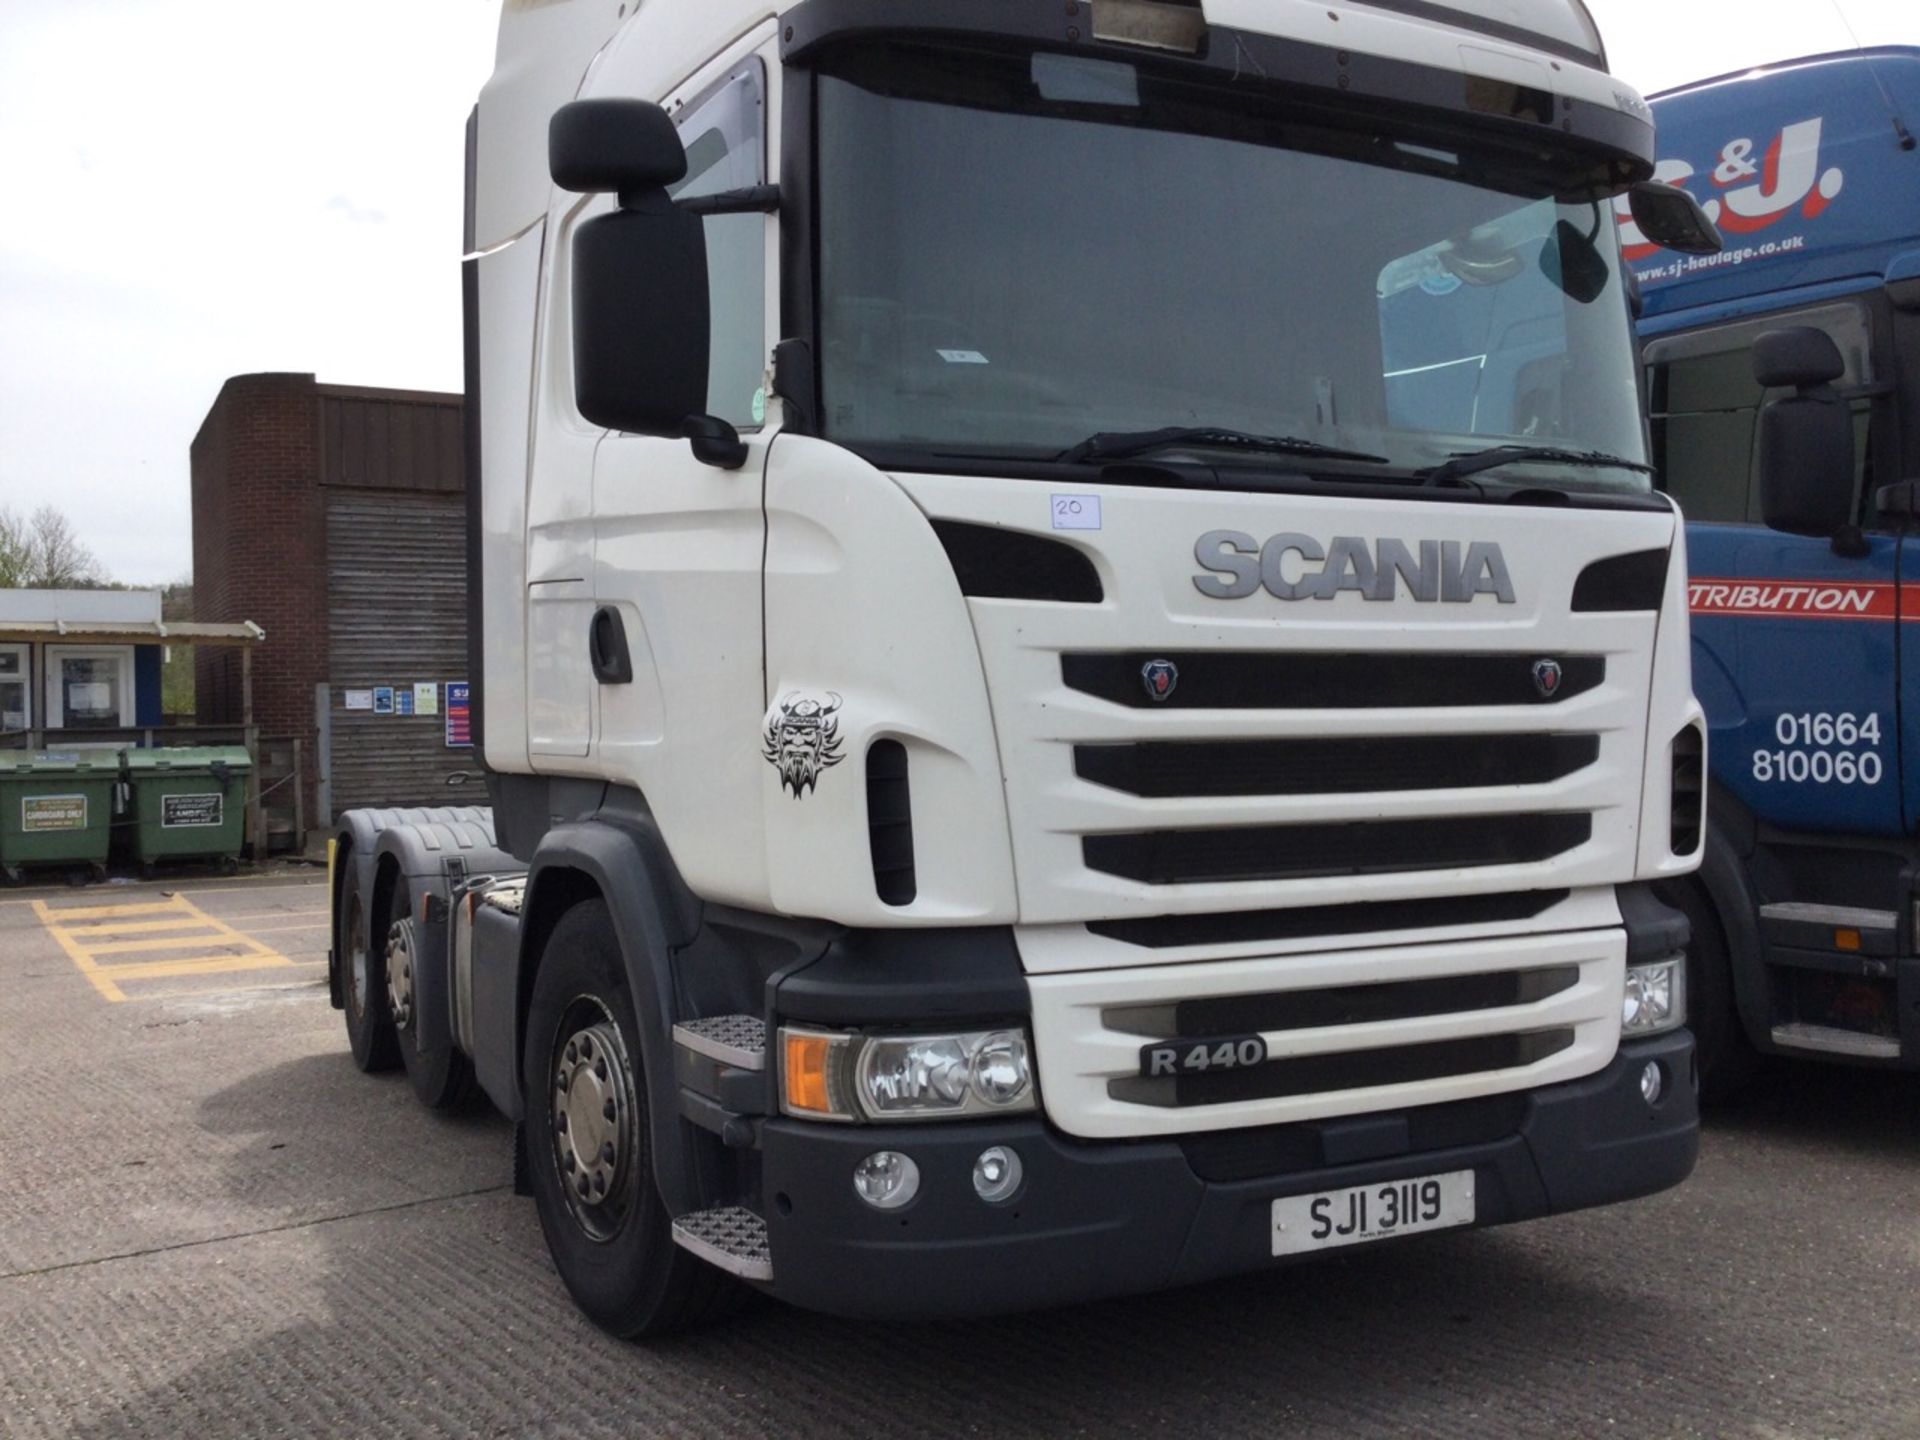 SCANIA R450 6x2 Topline Tractor Unit, with mid-lift axle, sleeper Until 30/04/24 Registration numbe